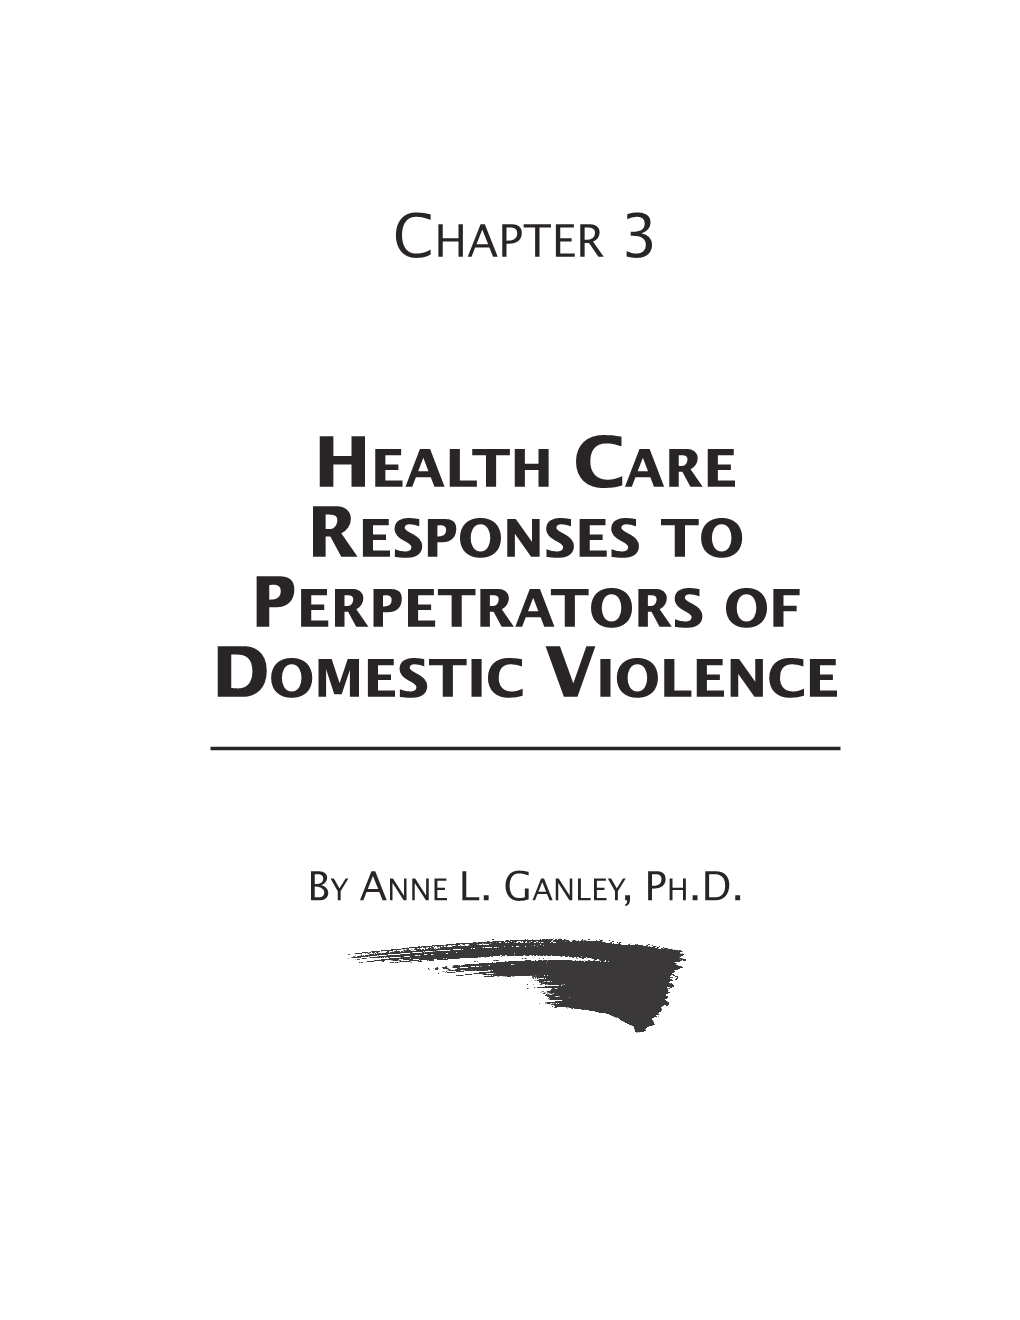 Health Care Responses to Perpetrators of Domestic Violence